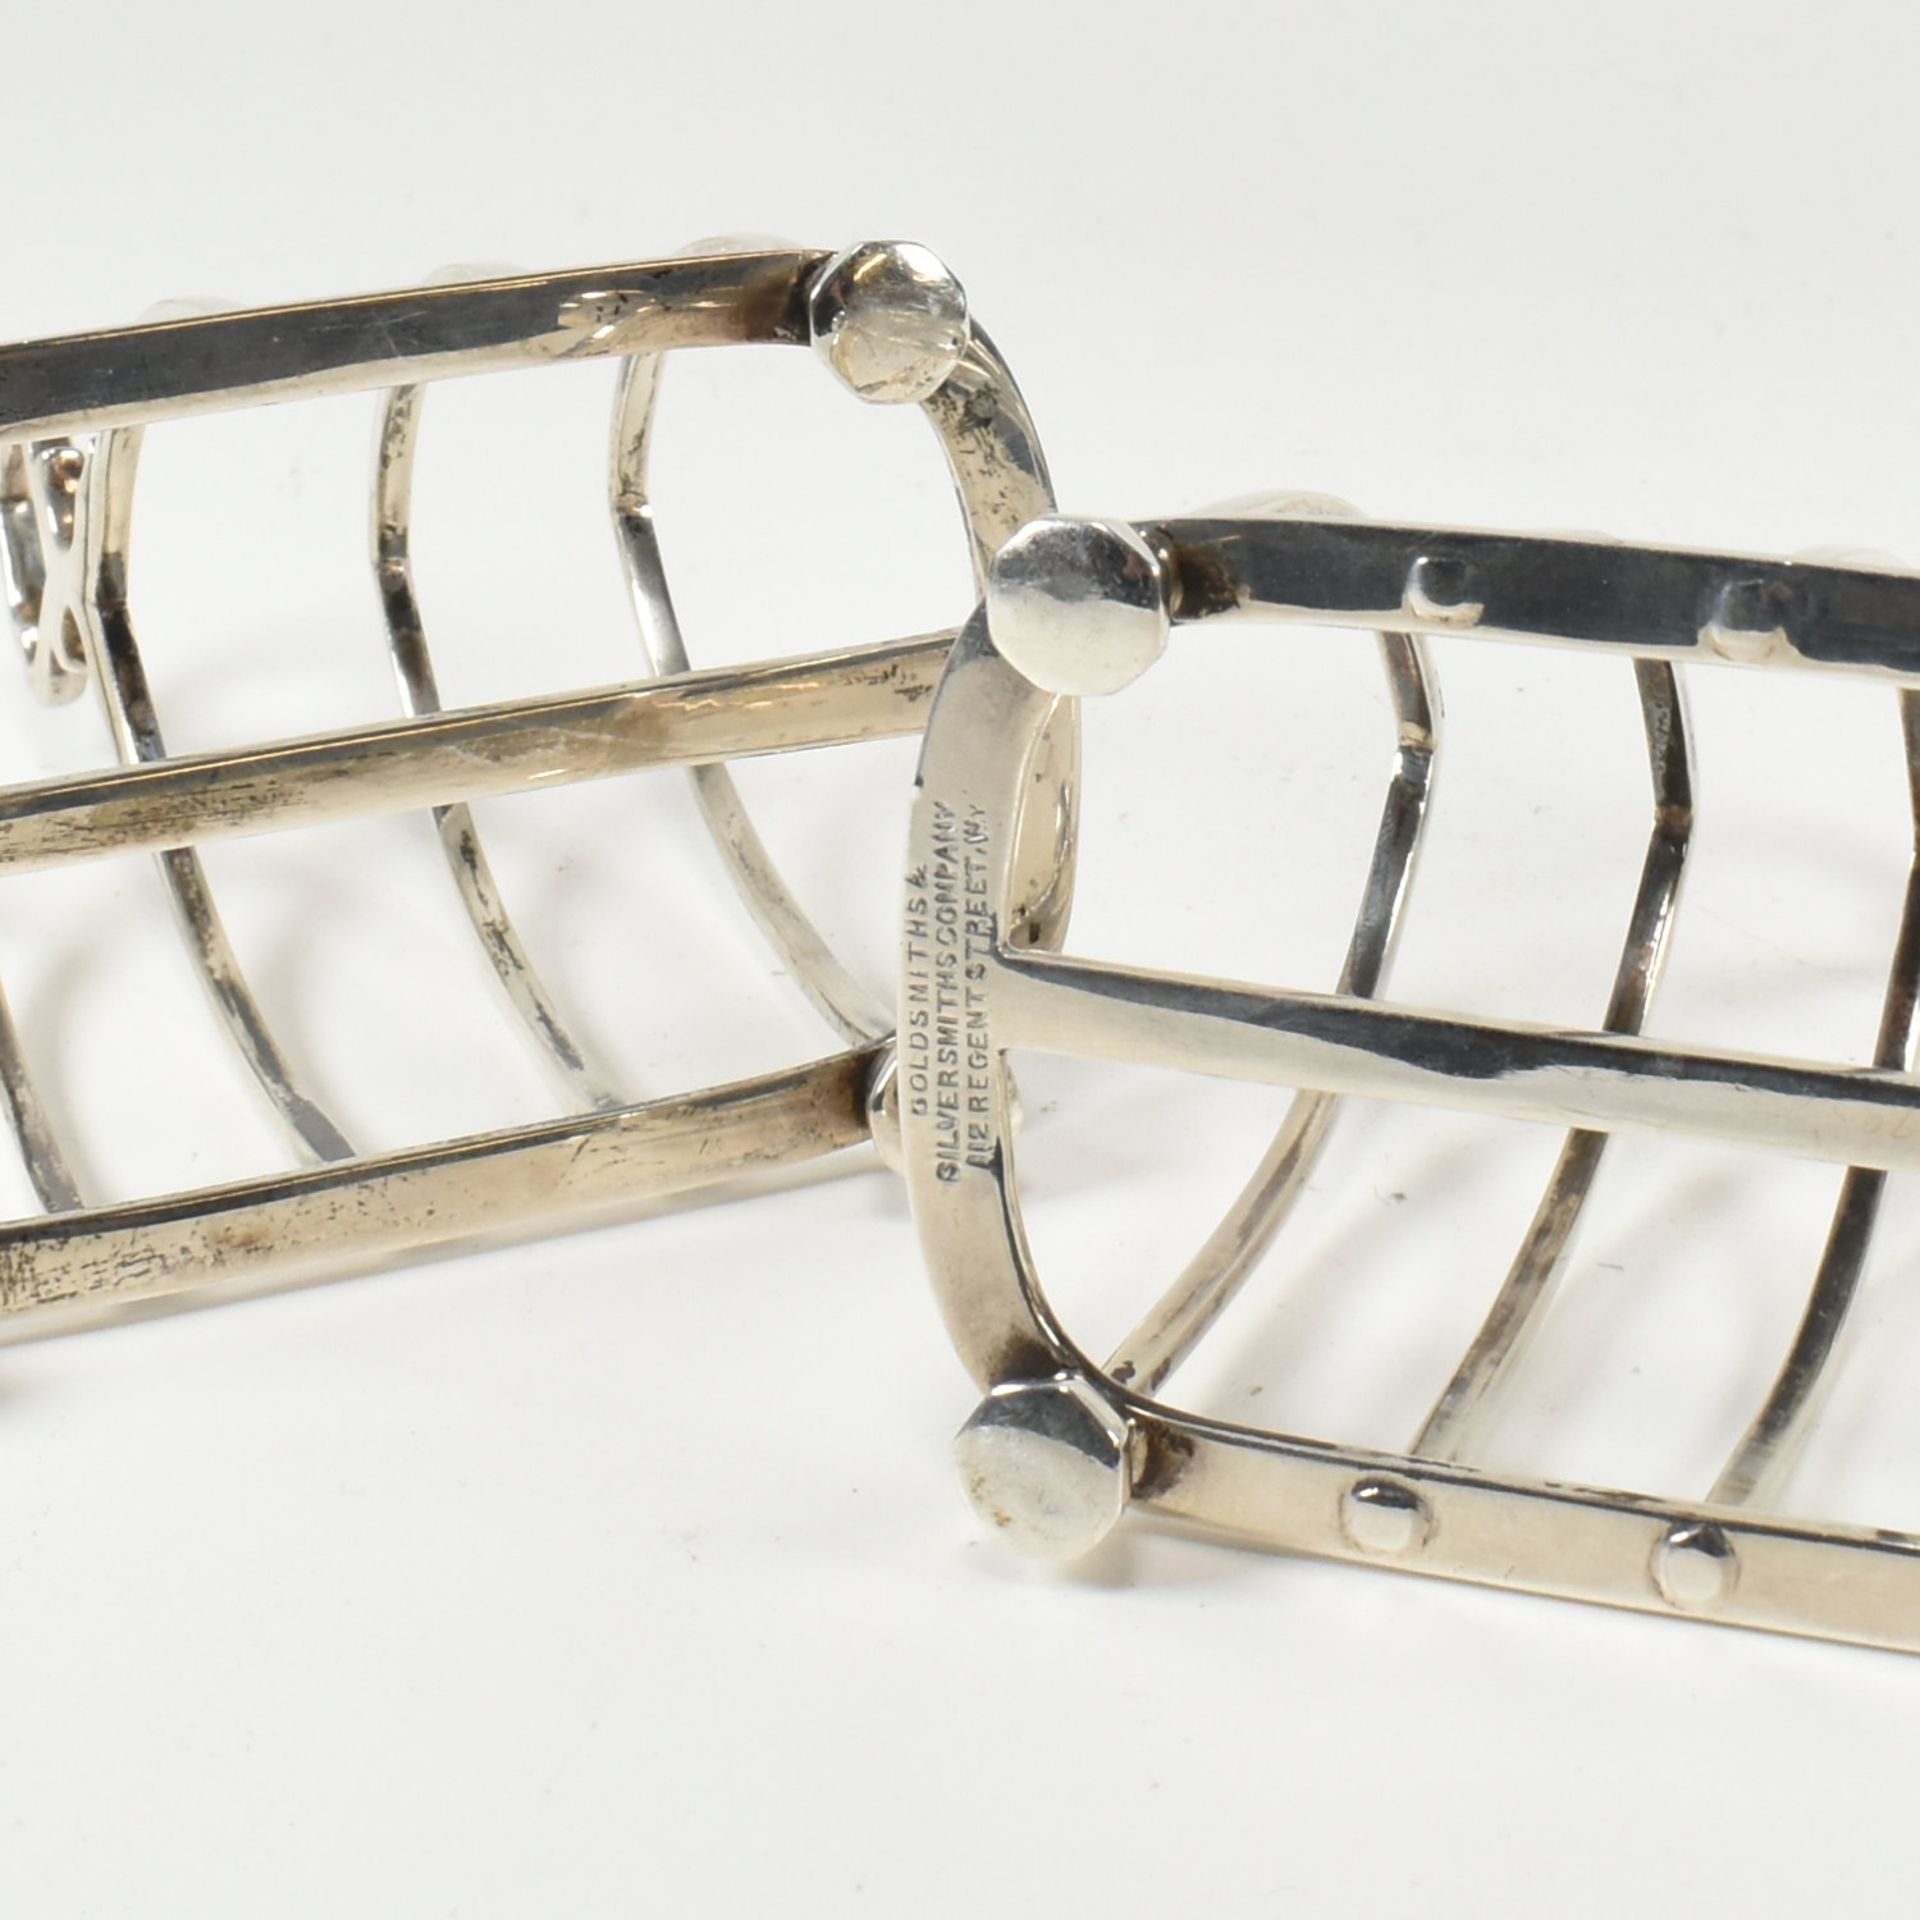 GEORGE V MATCHED PAIR OF HALLMARKED SILVER TOAST RACKS - Image 8 of 8